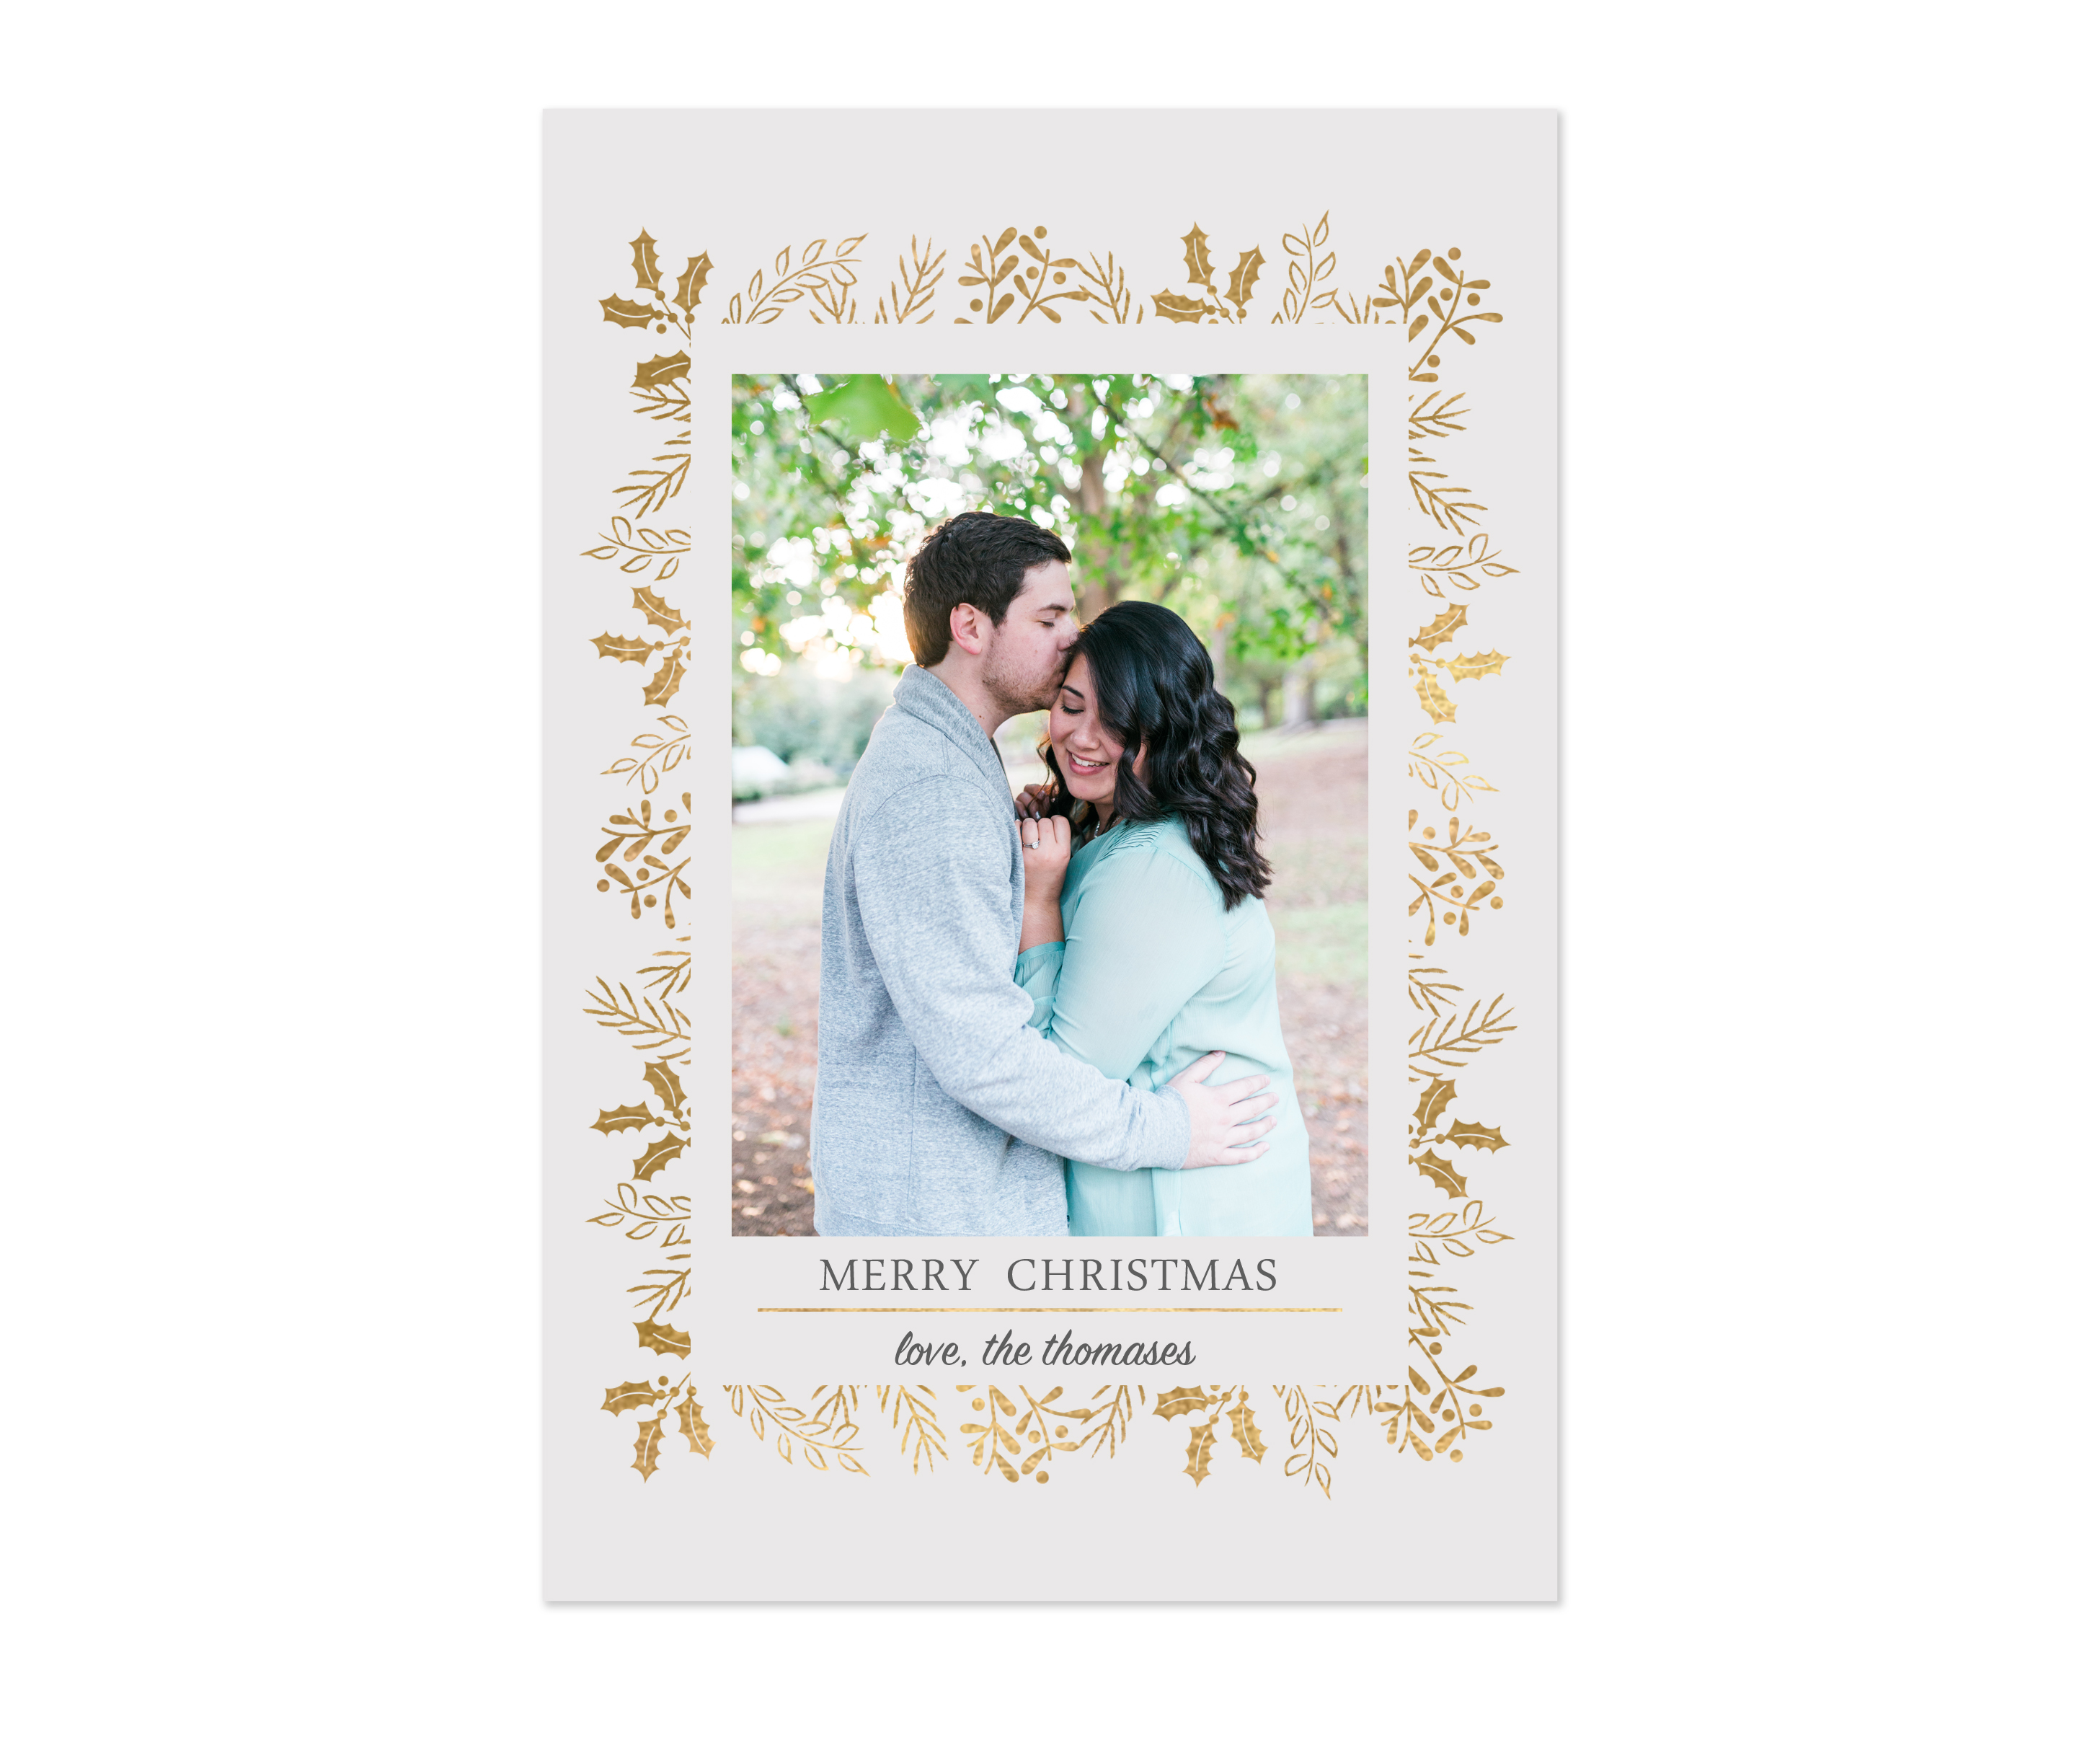 2015 holiday cards